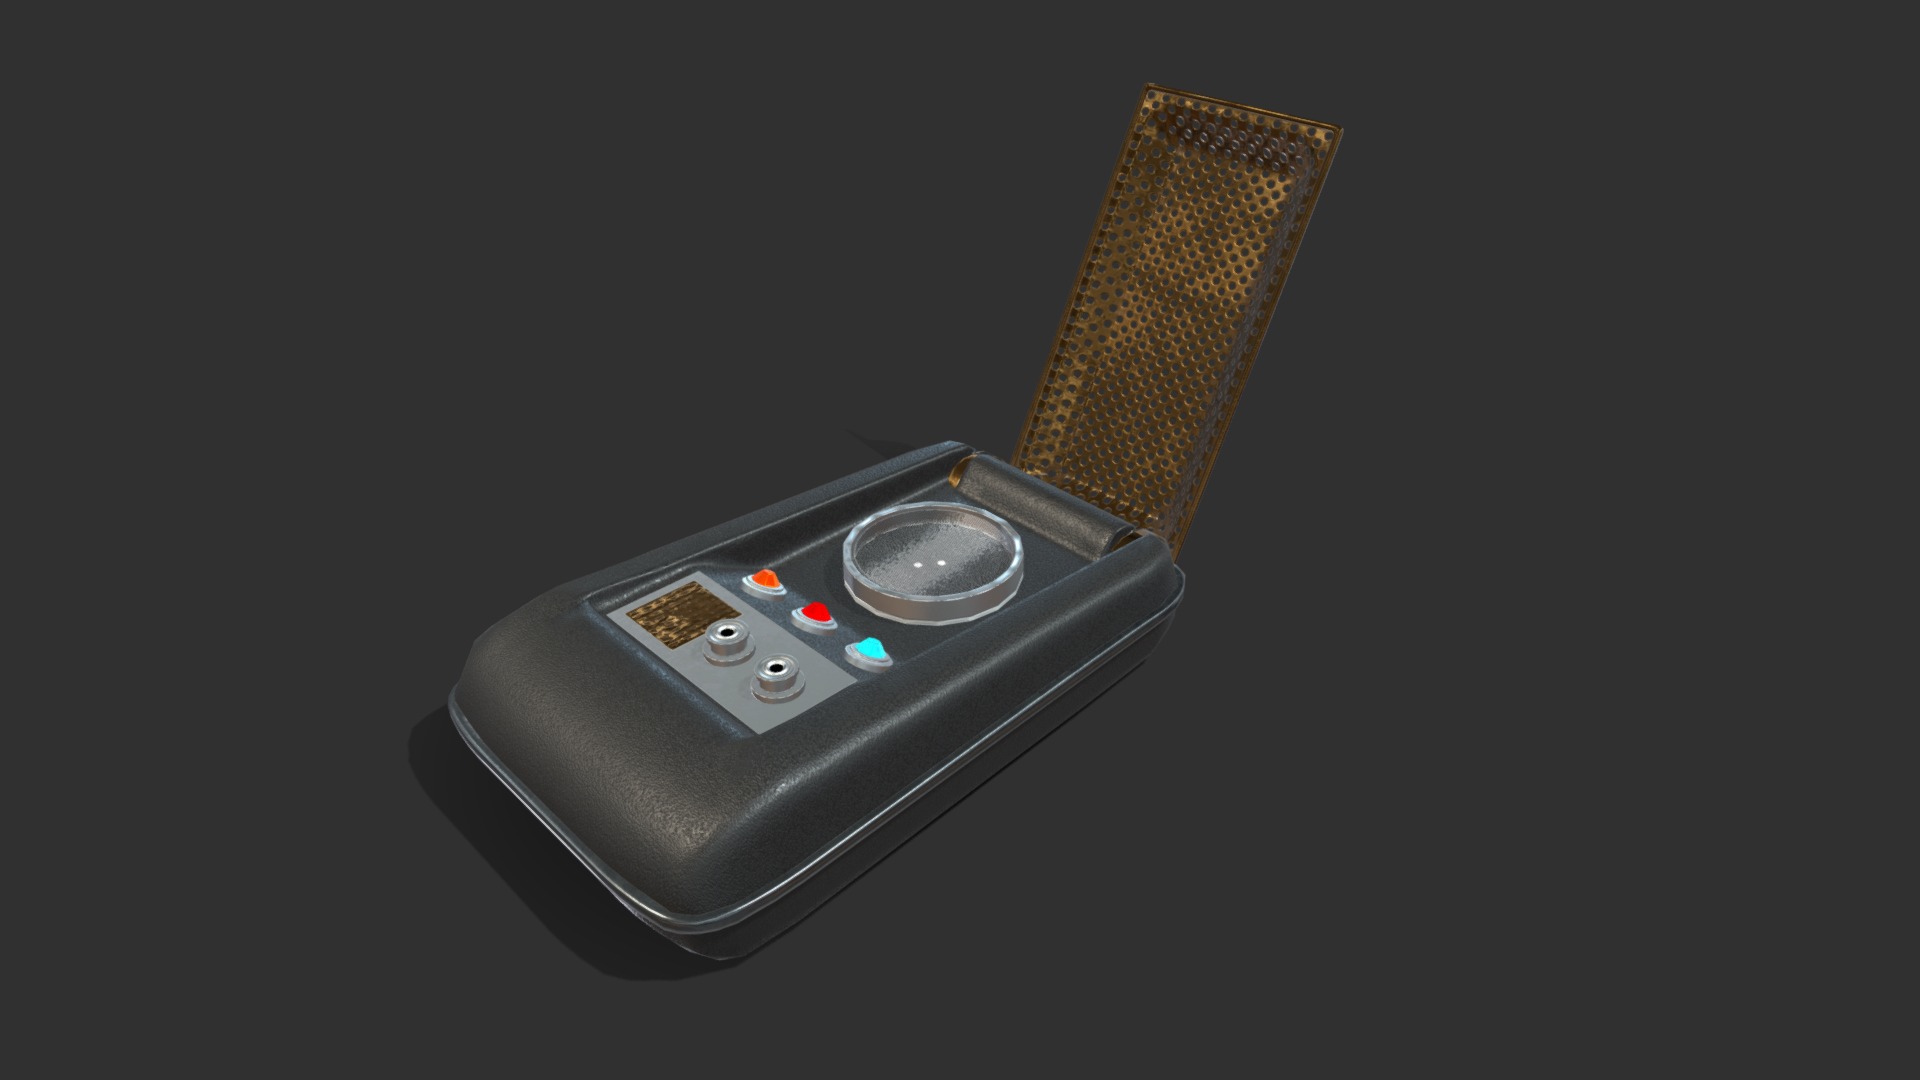 3D model Sci-Fi Communicator PBR - This is a 3D model of the Sci-Fi Communicator PBR. The 3D model is about a black rectangular object with buttons and a silver box on top.